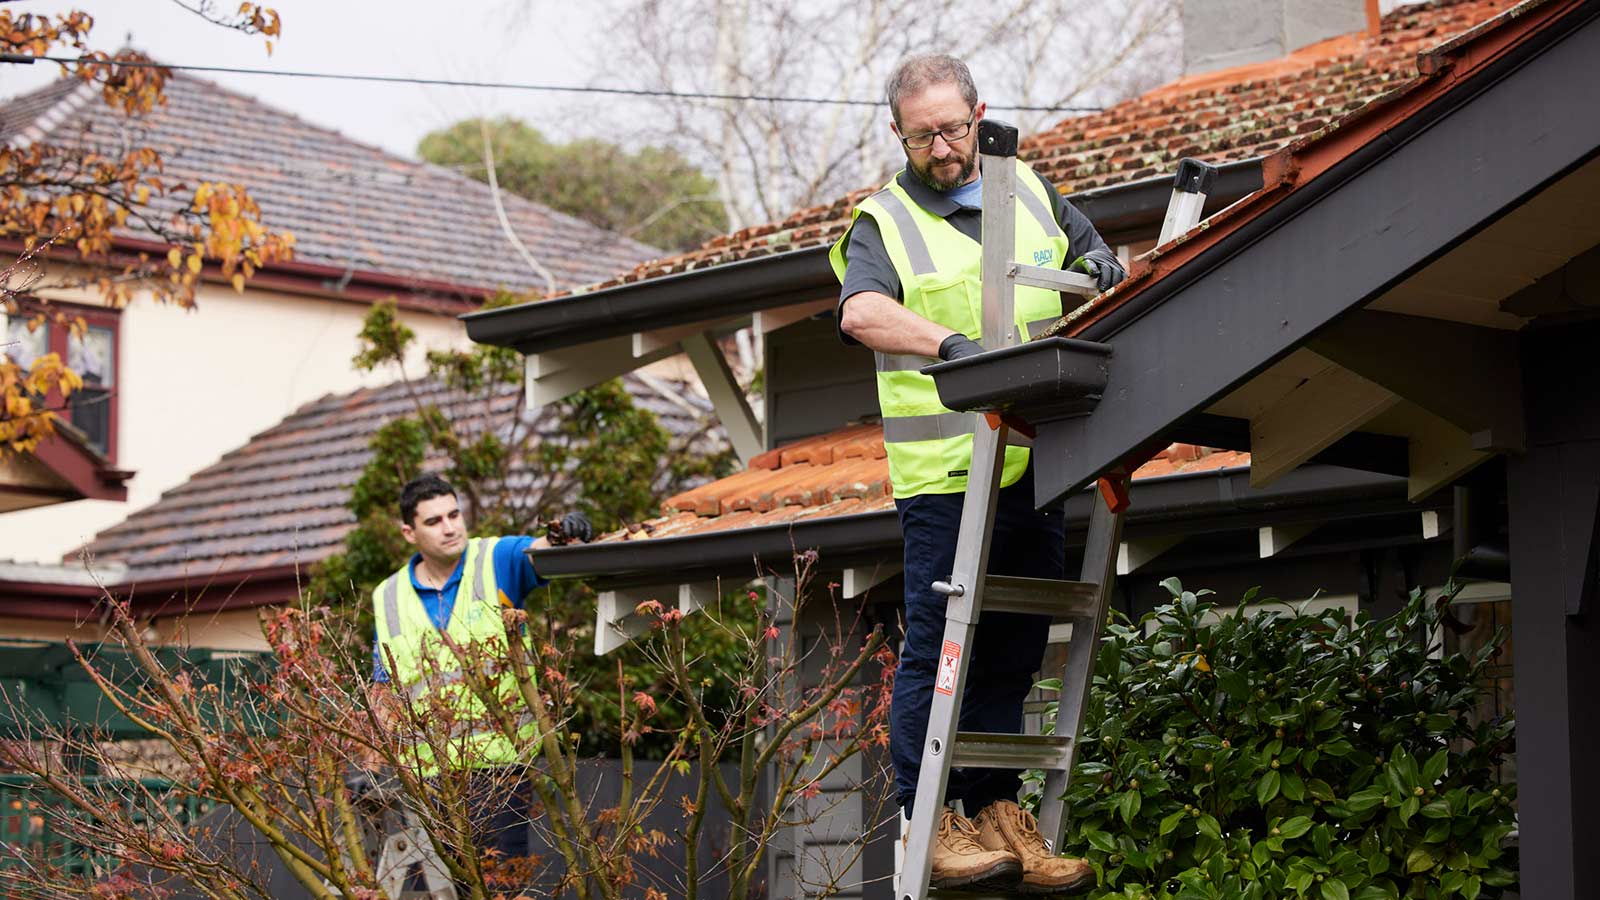 Two tradesmen standing on individual ladders clearing gutters from a roof of a house.